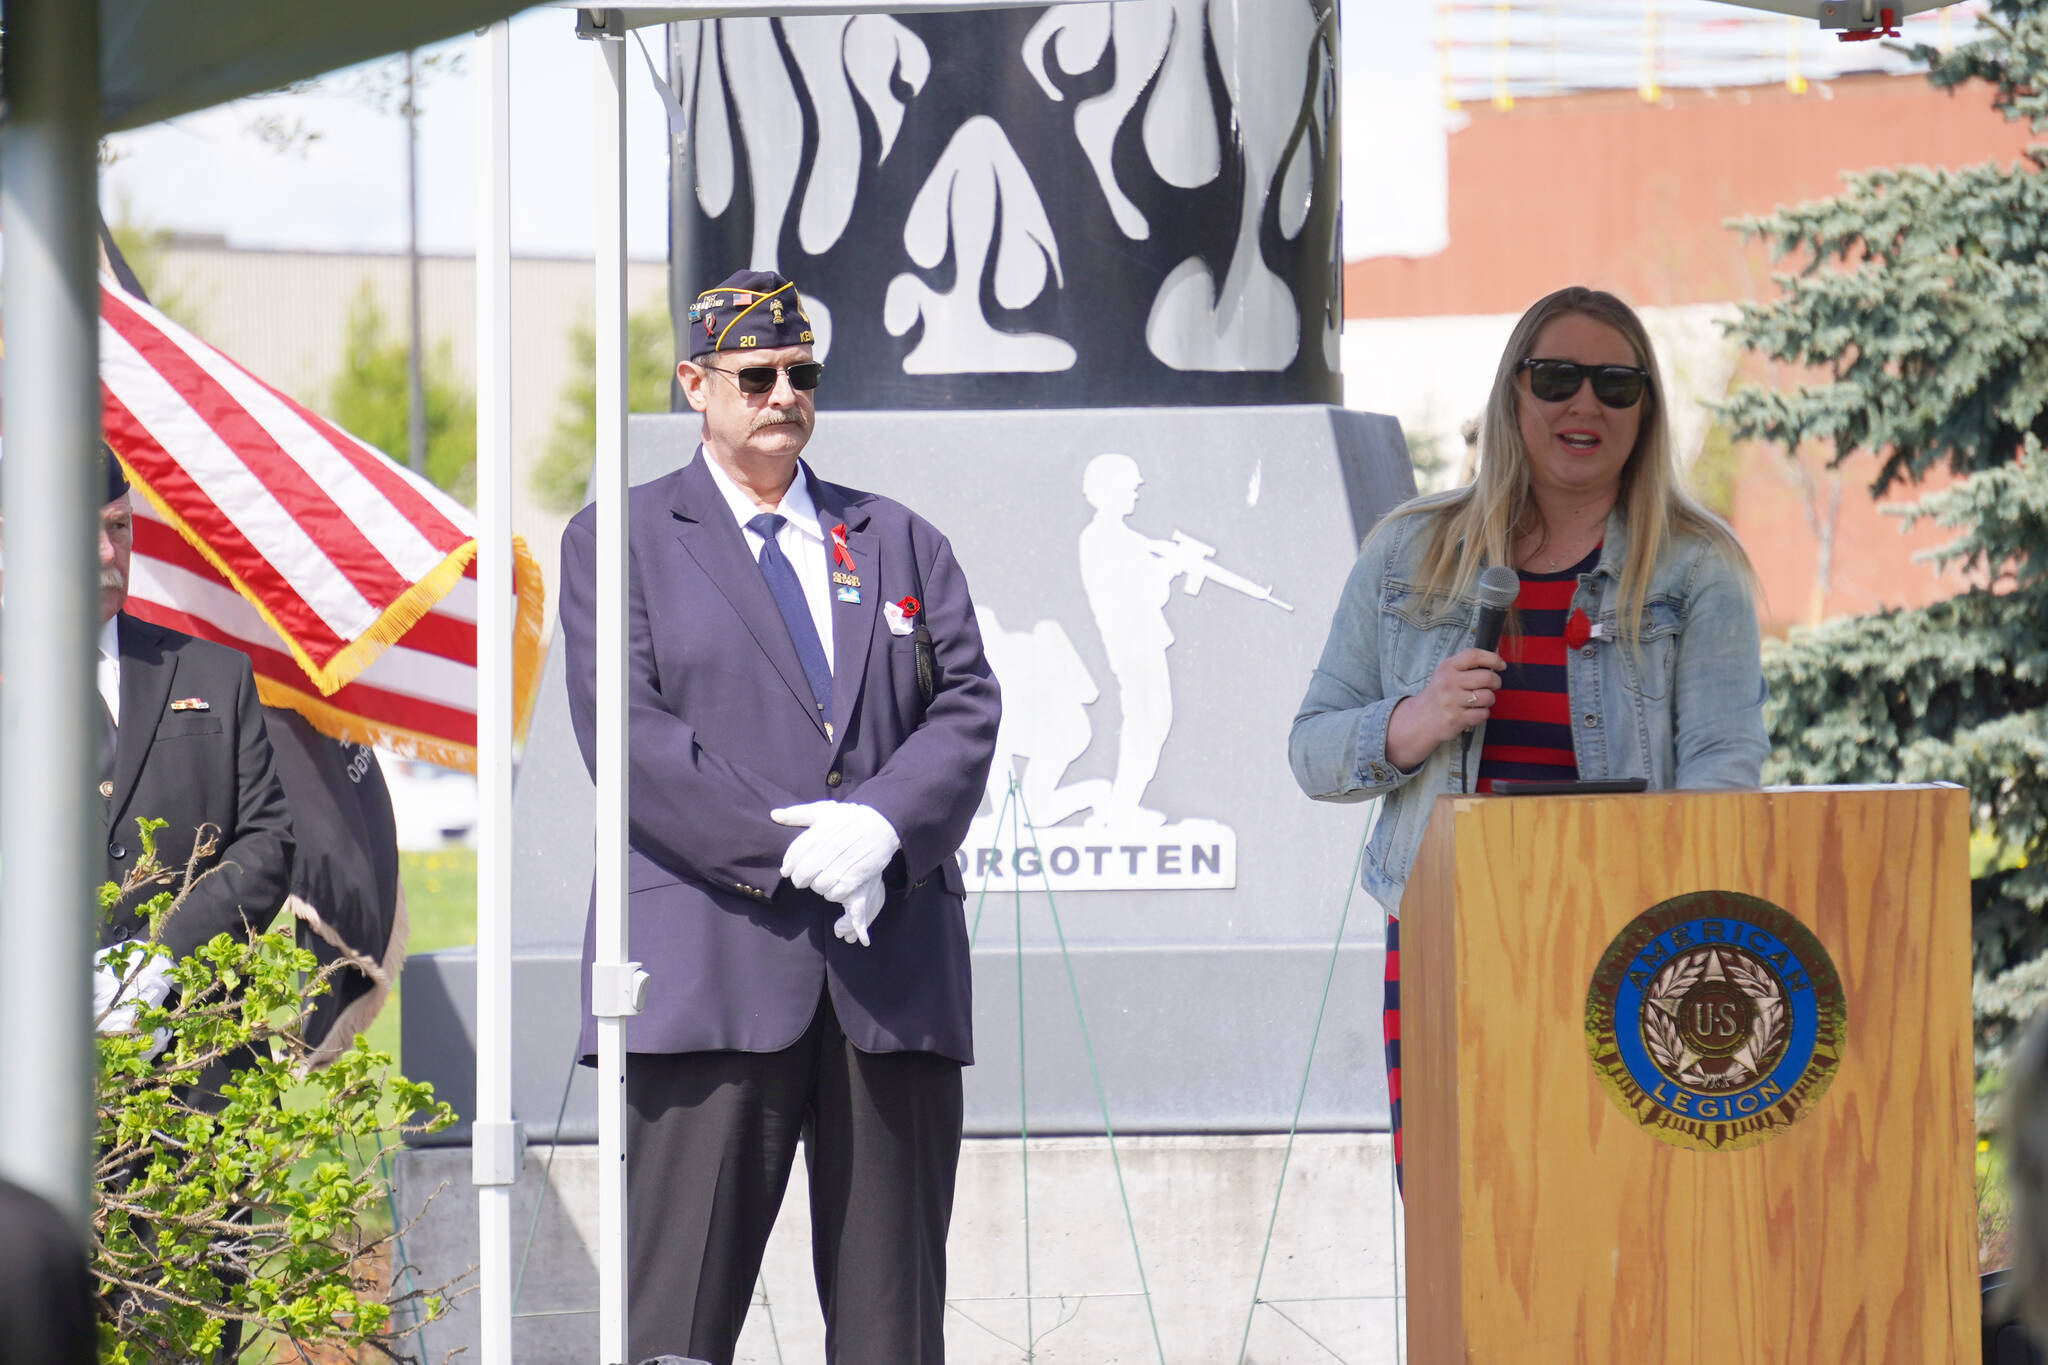 American Legion Post 20 Past Cmdr. David Segura stands as Jill Schaefer speaks on behalf of Gov. Mike Dunleavy during a Memorial Day ceremony on Monday, May 29, 2023, at Leif Hanson Memorial Park in Kenai, Alaska. (Jake Dye/Peninsula Clarion)